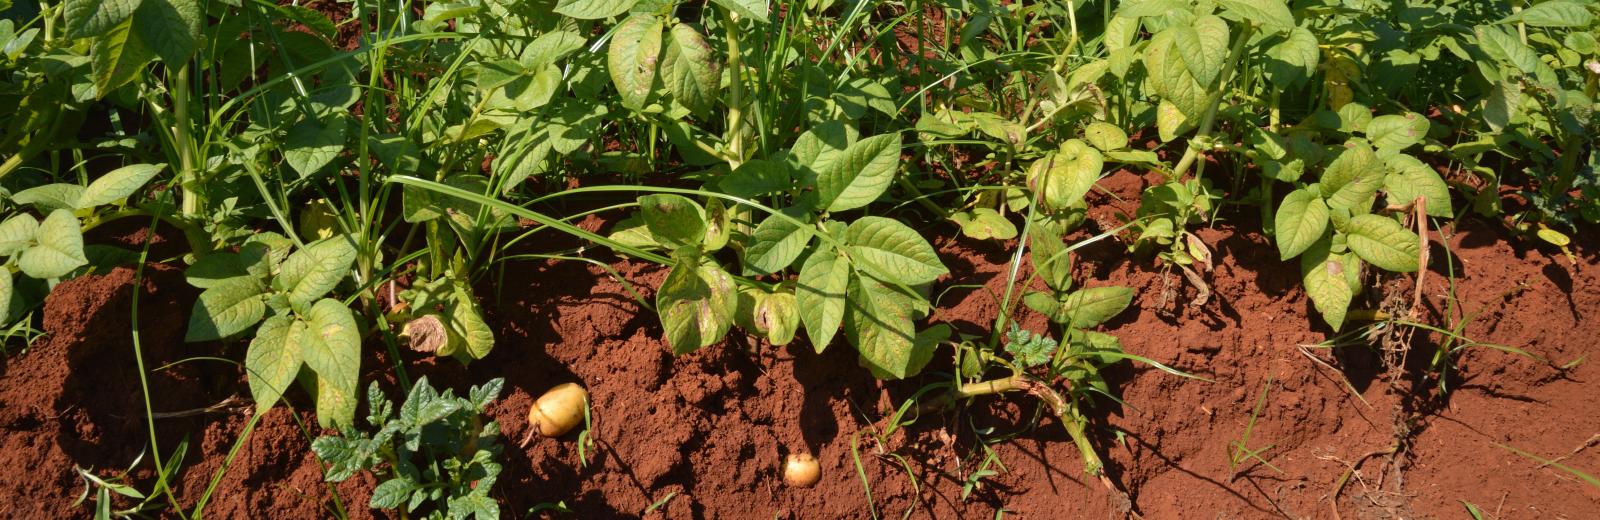 Over time, the PERECUSO project aims to establish new processing models suitable for Cuban potato production © Agroscope, Thomas Bucheli